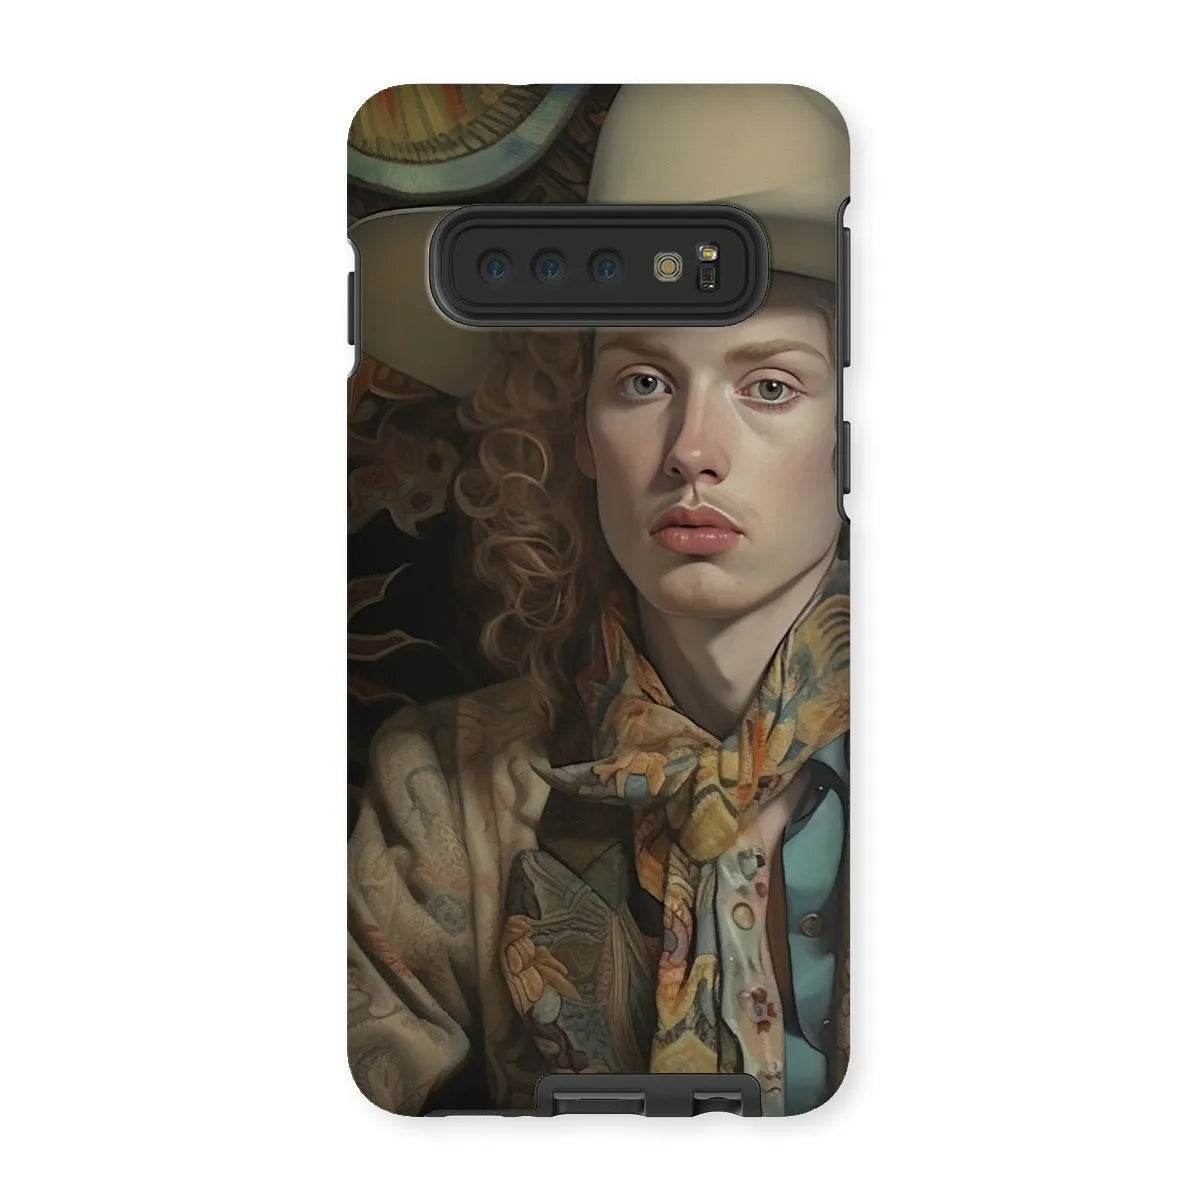 Ollie The Transgender Cowboy - F2m Dandy Outlaw Phone Case - Samsung Galaxy S10 / Matte - Mobile Phone Cases